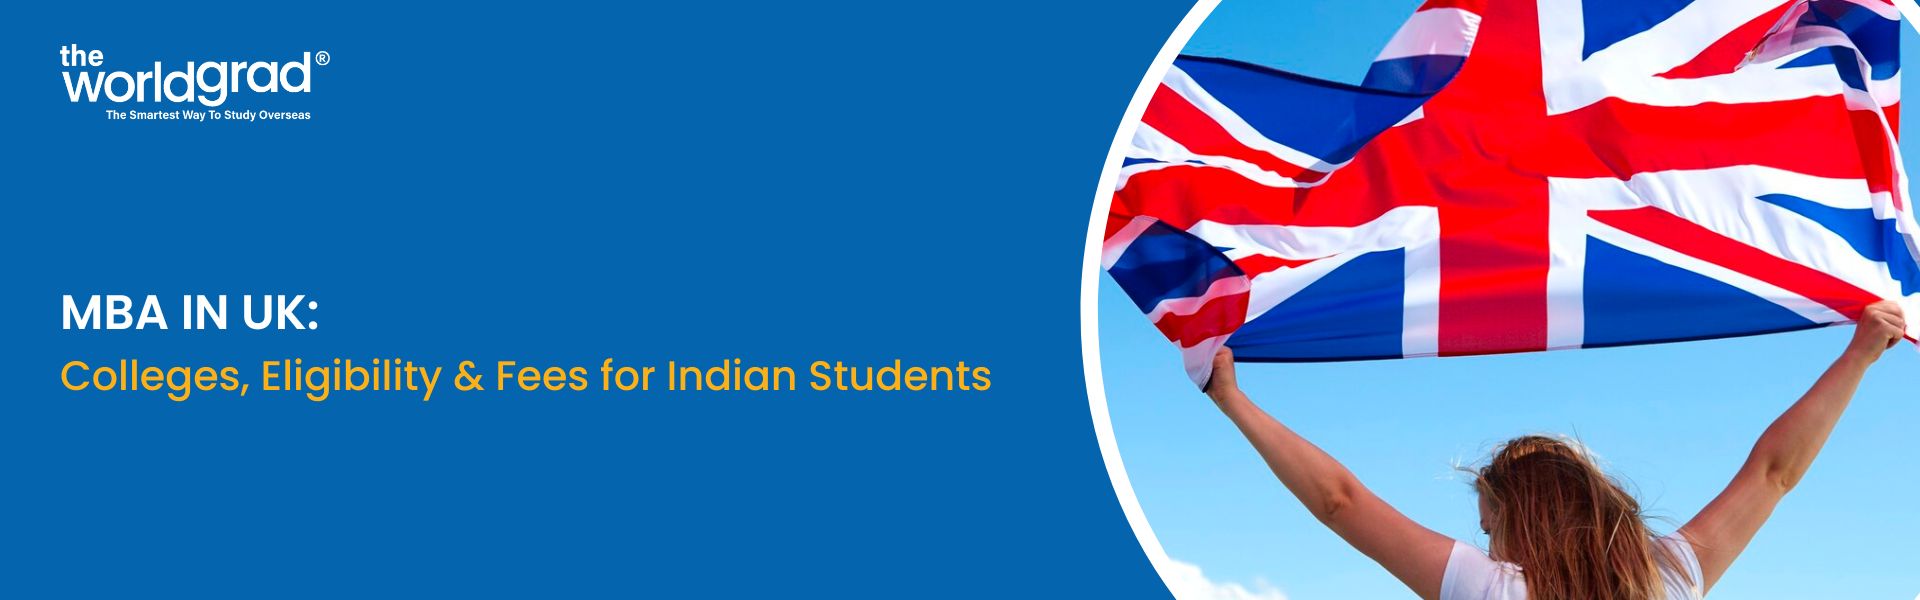 MBA in UK: Colleges, Eligibility & Fees for Indian Students